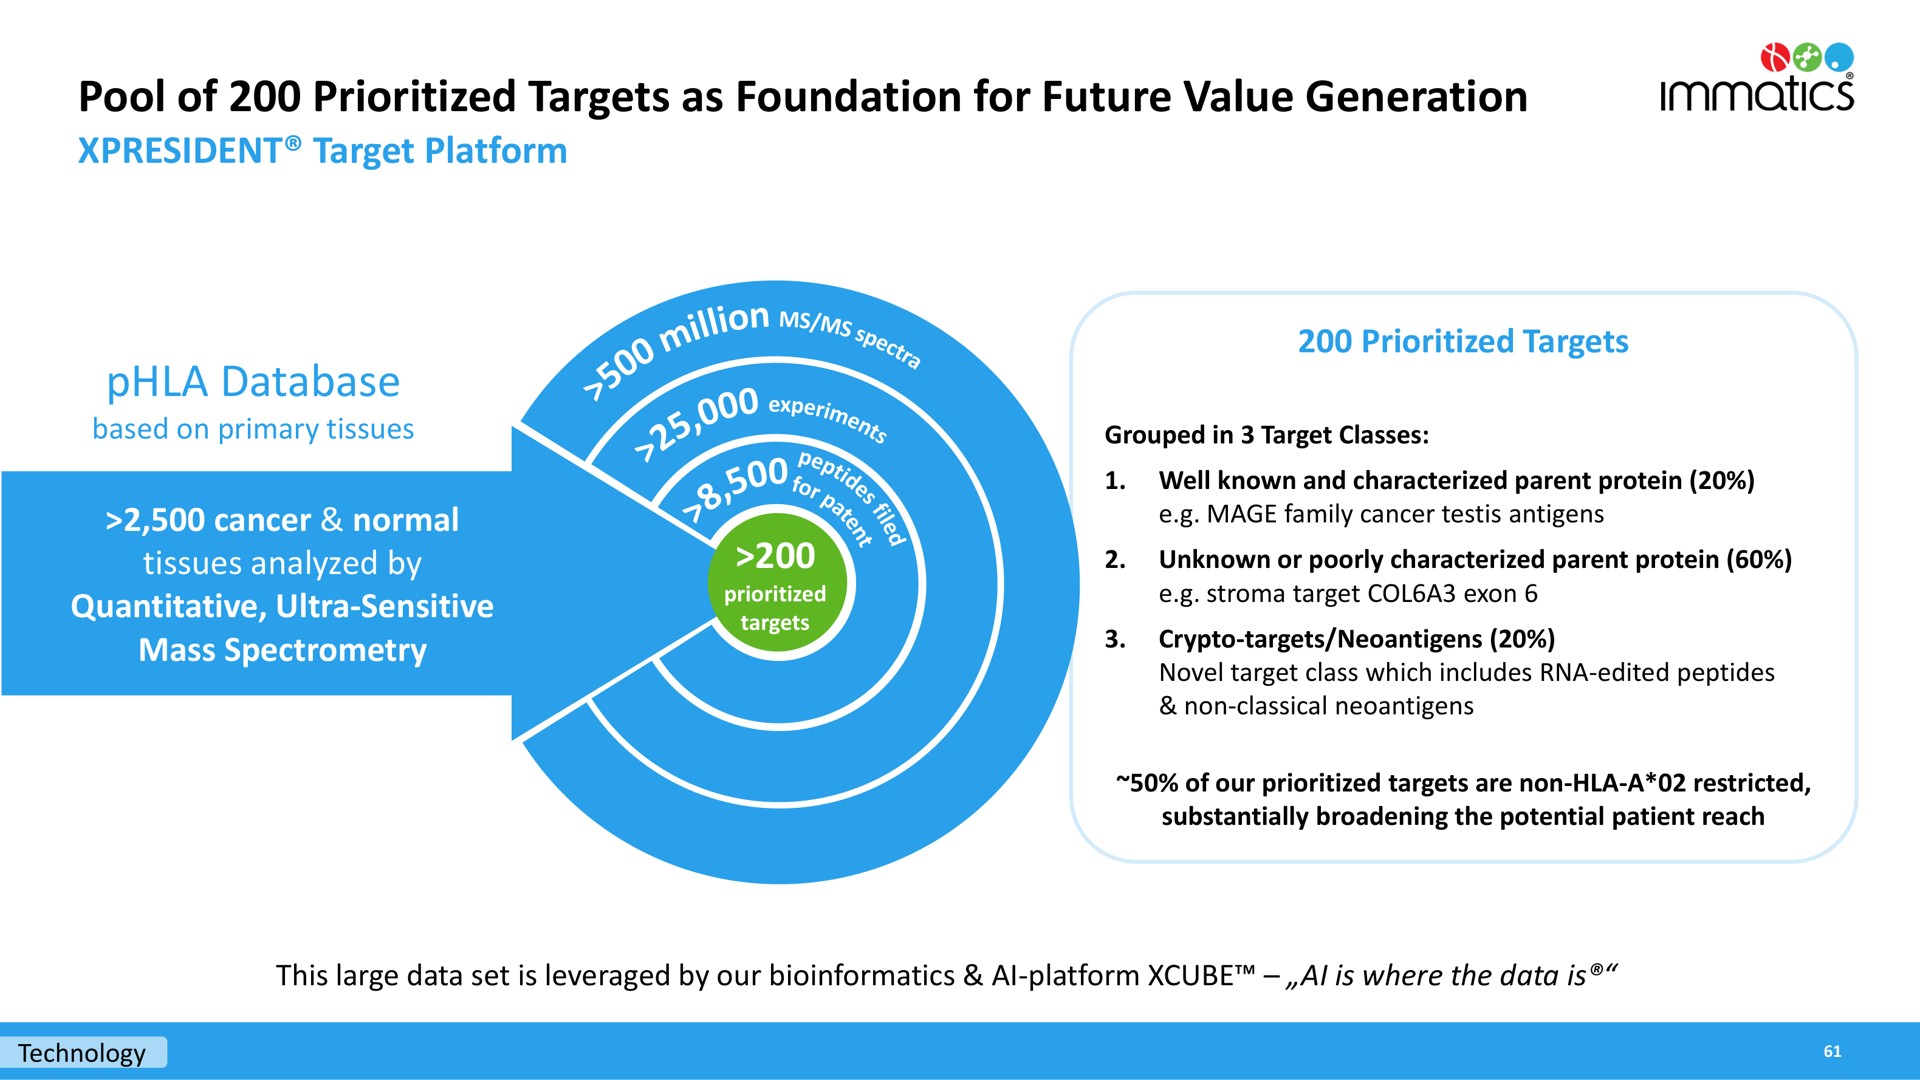 pool of targets as foundation for future value generation | Immatics